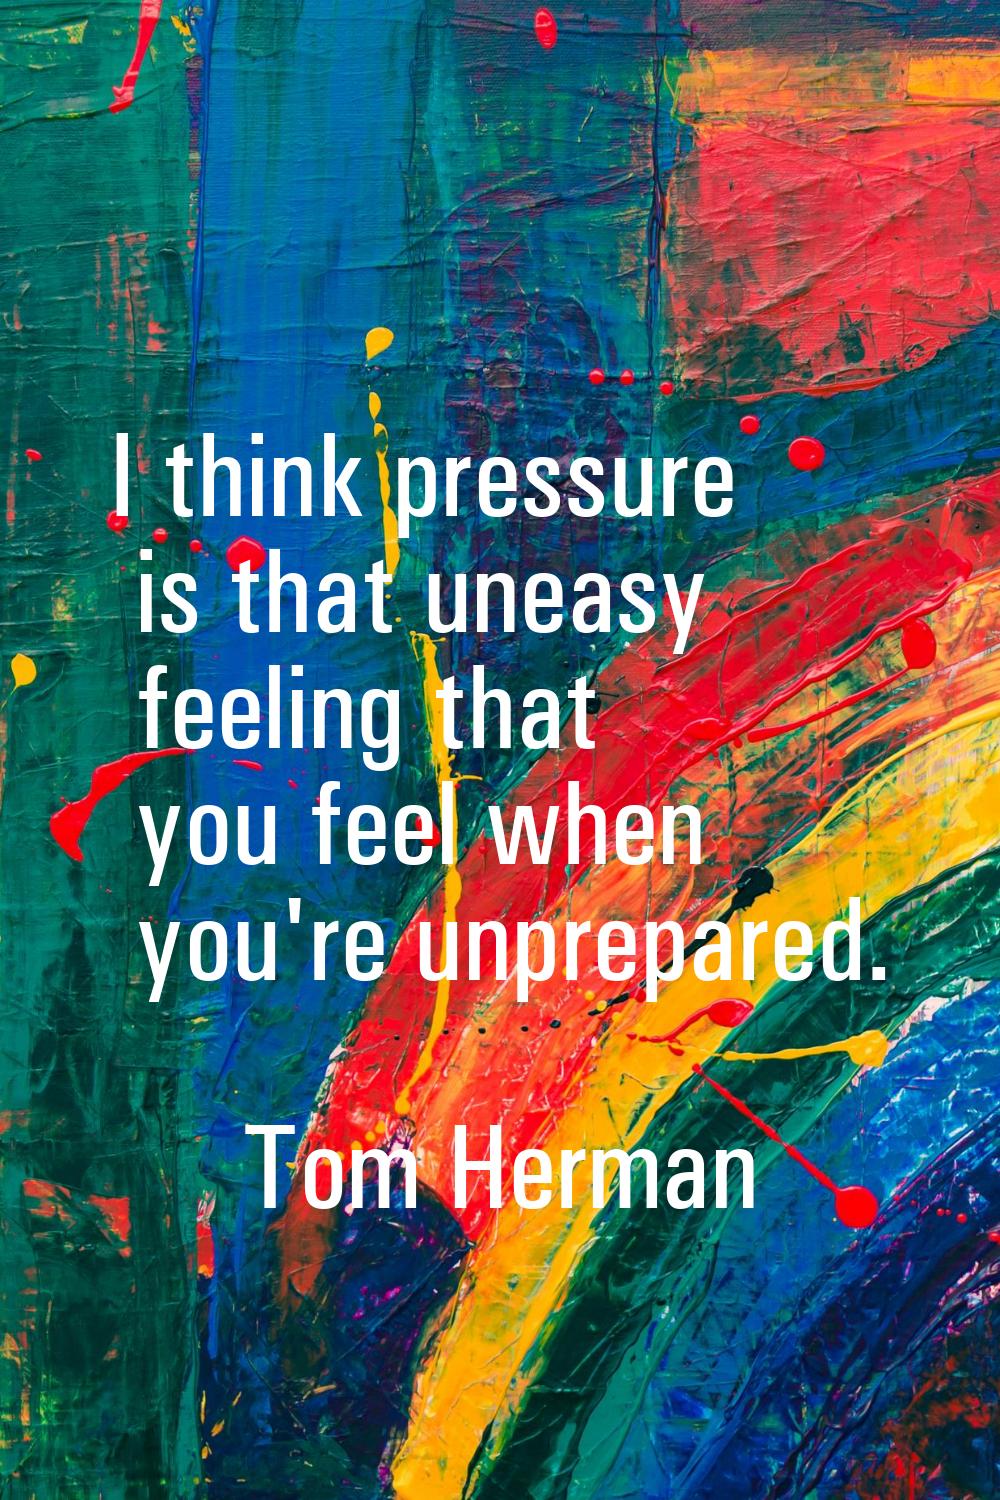 I think pressure is that uneasy feeling that you feel when you're unprepared.